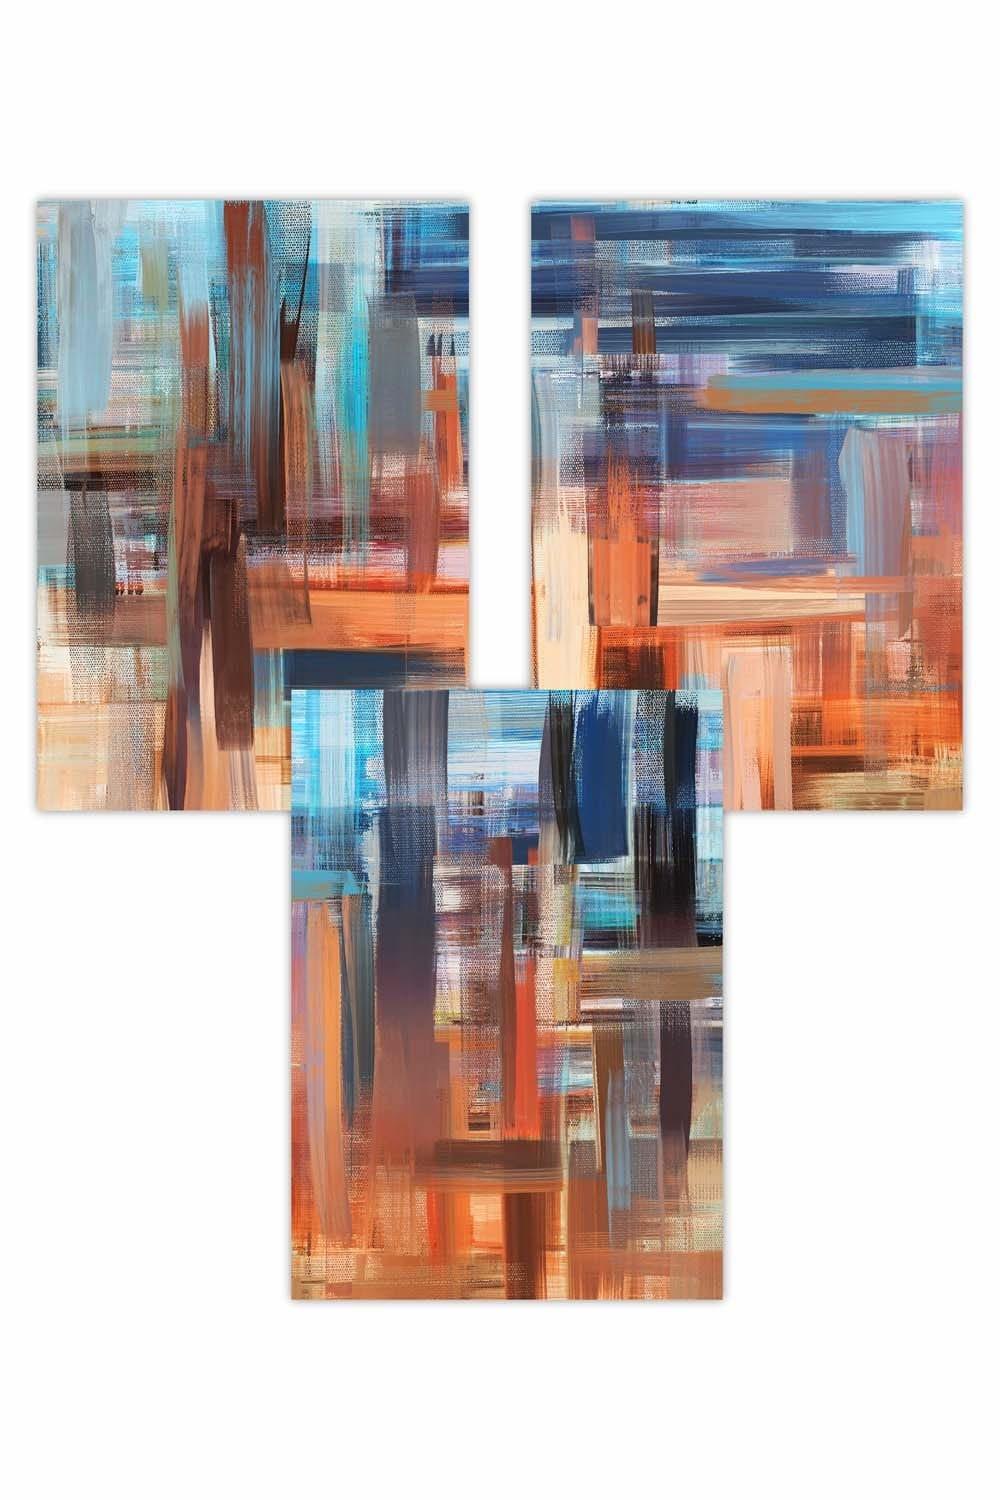 Set of 3 Geometric Abstract Sunset City In Blue and Orange Art Posters